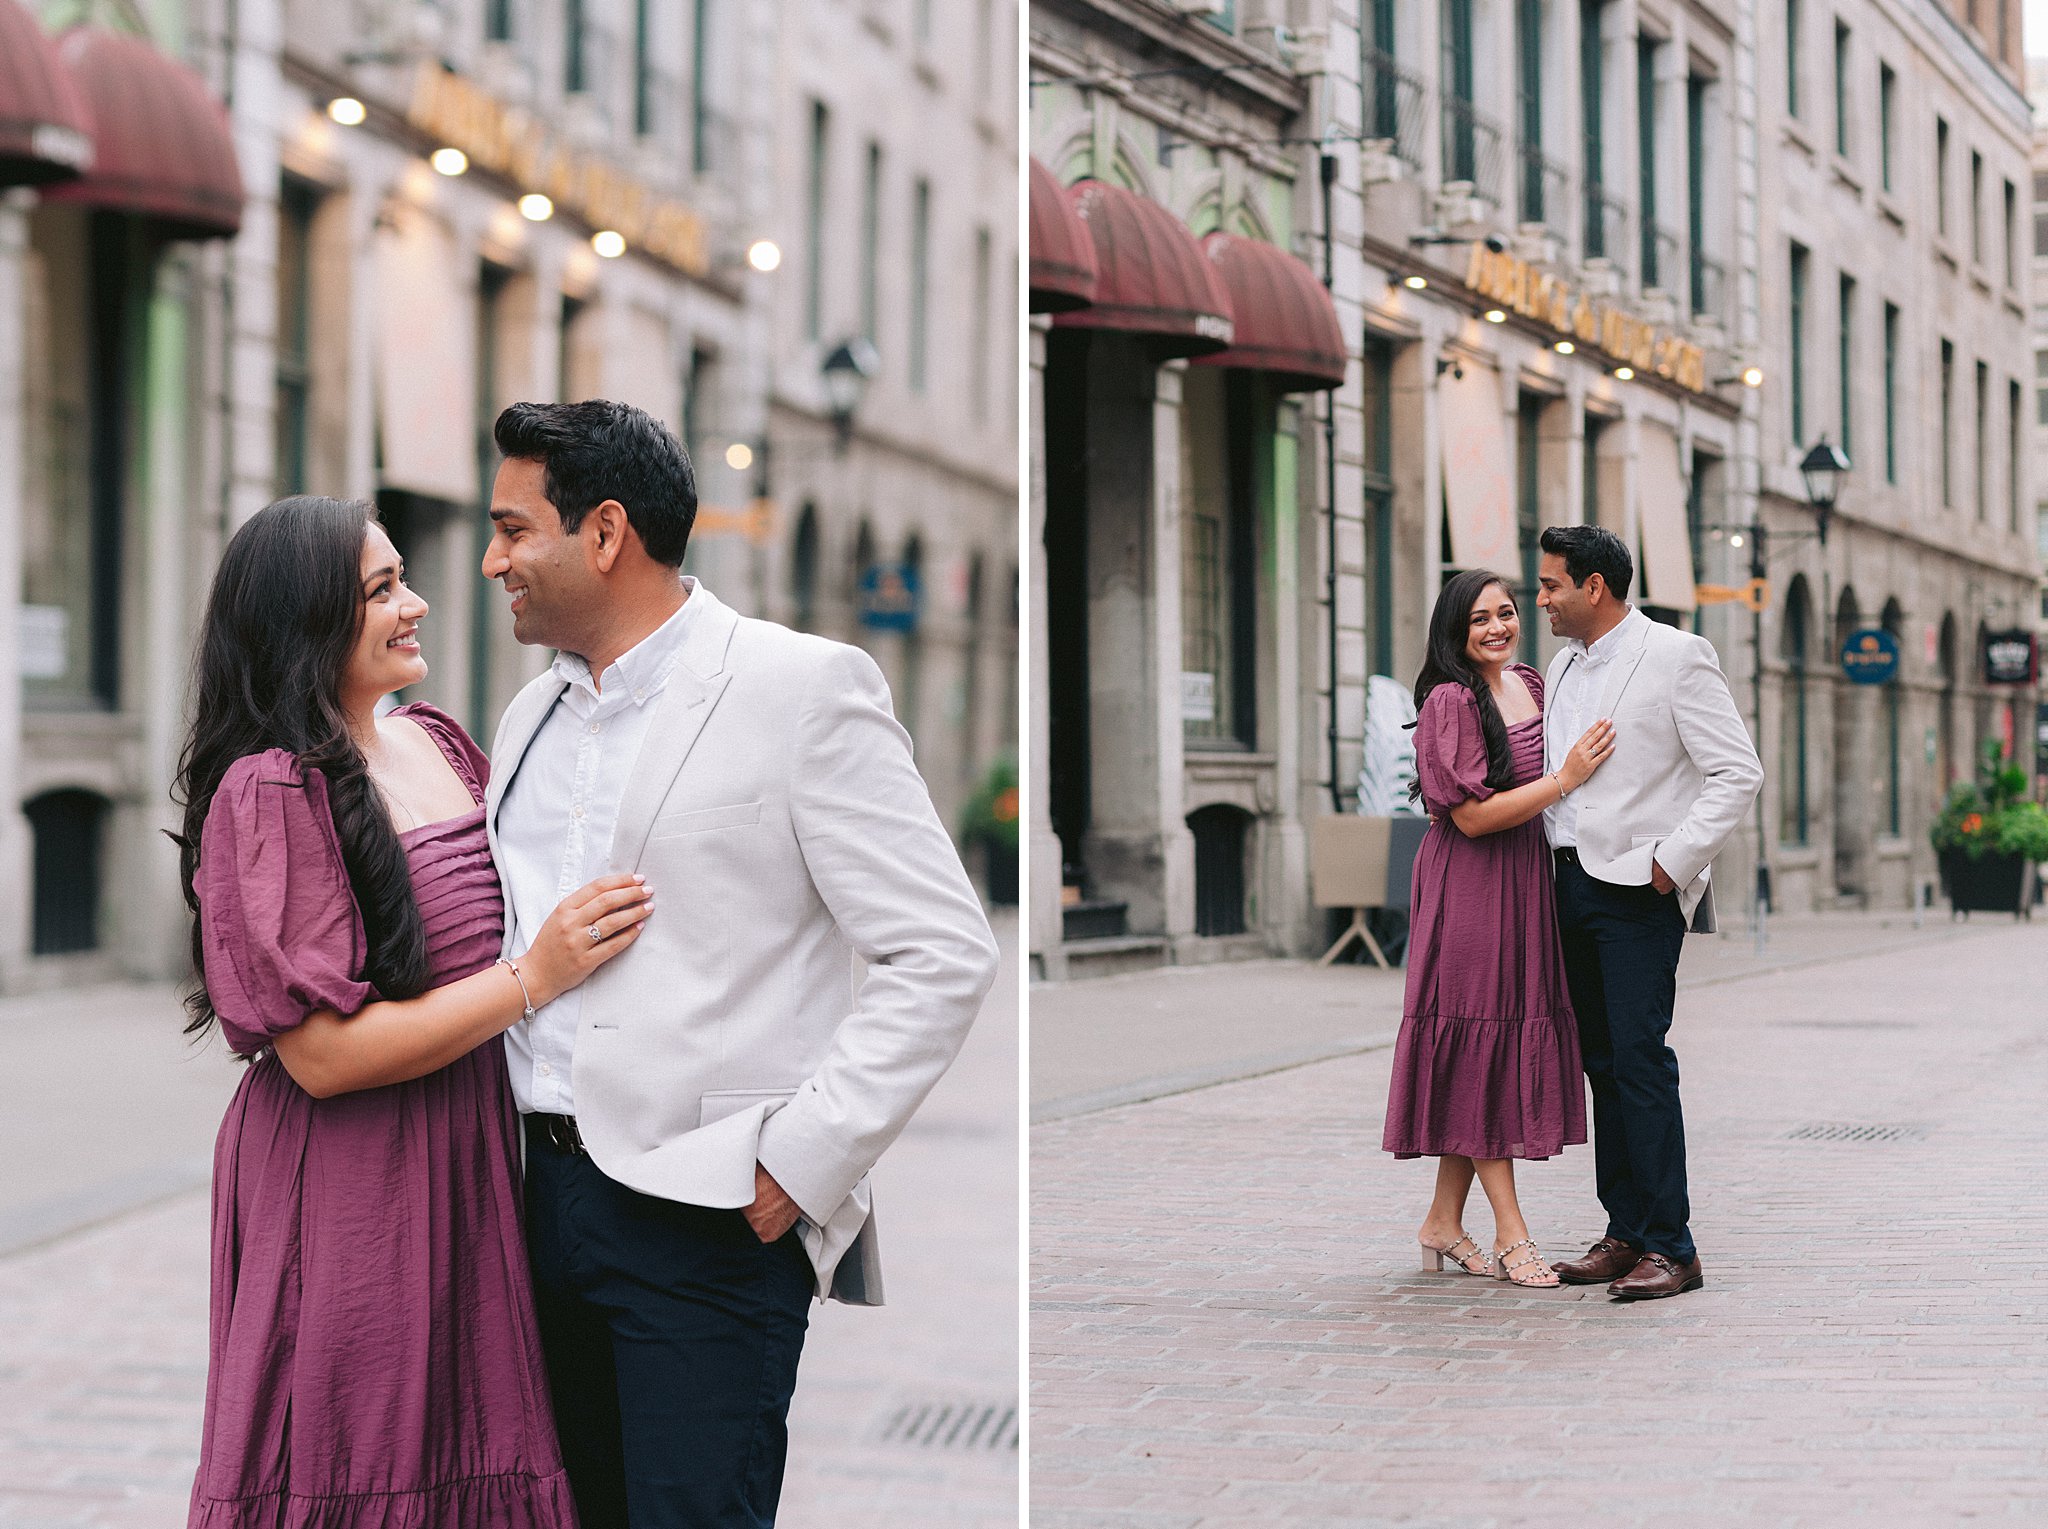 From Montreal with love: A sneak peek of their engagement